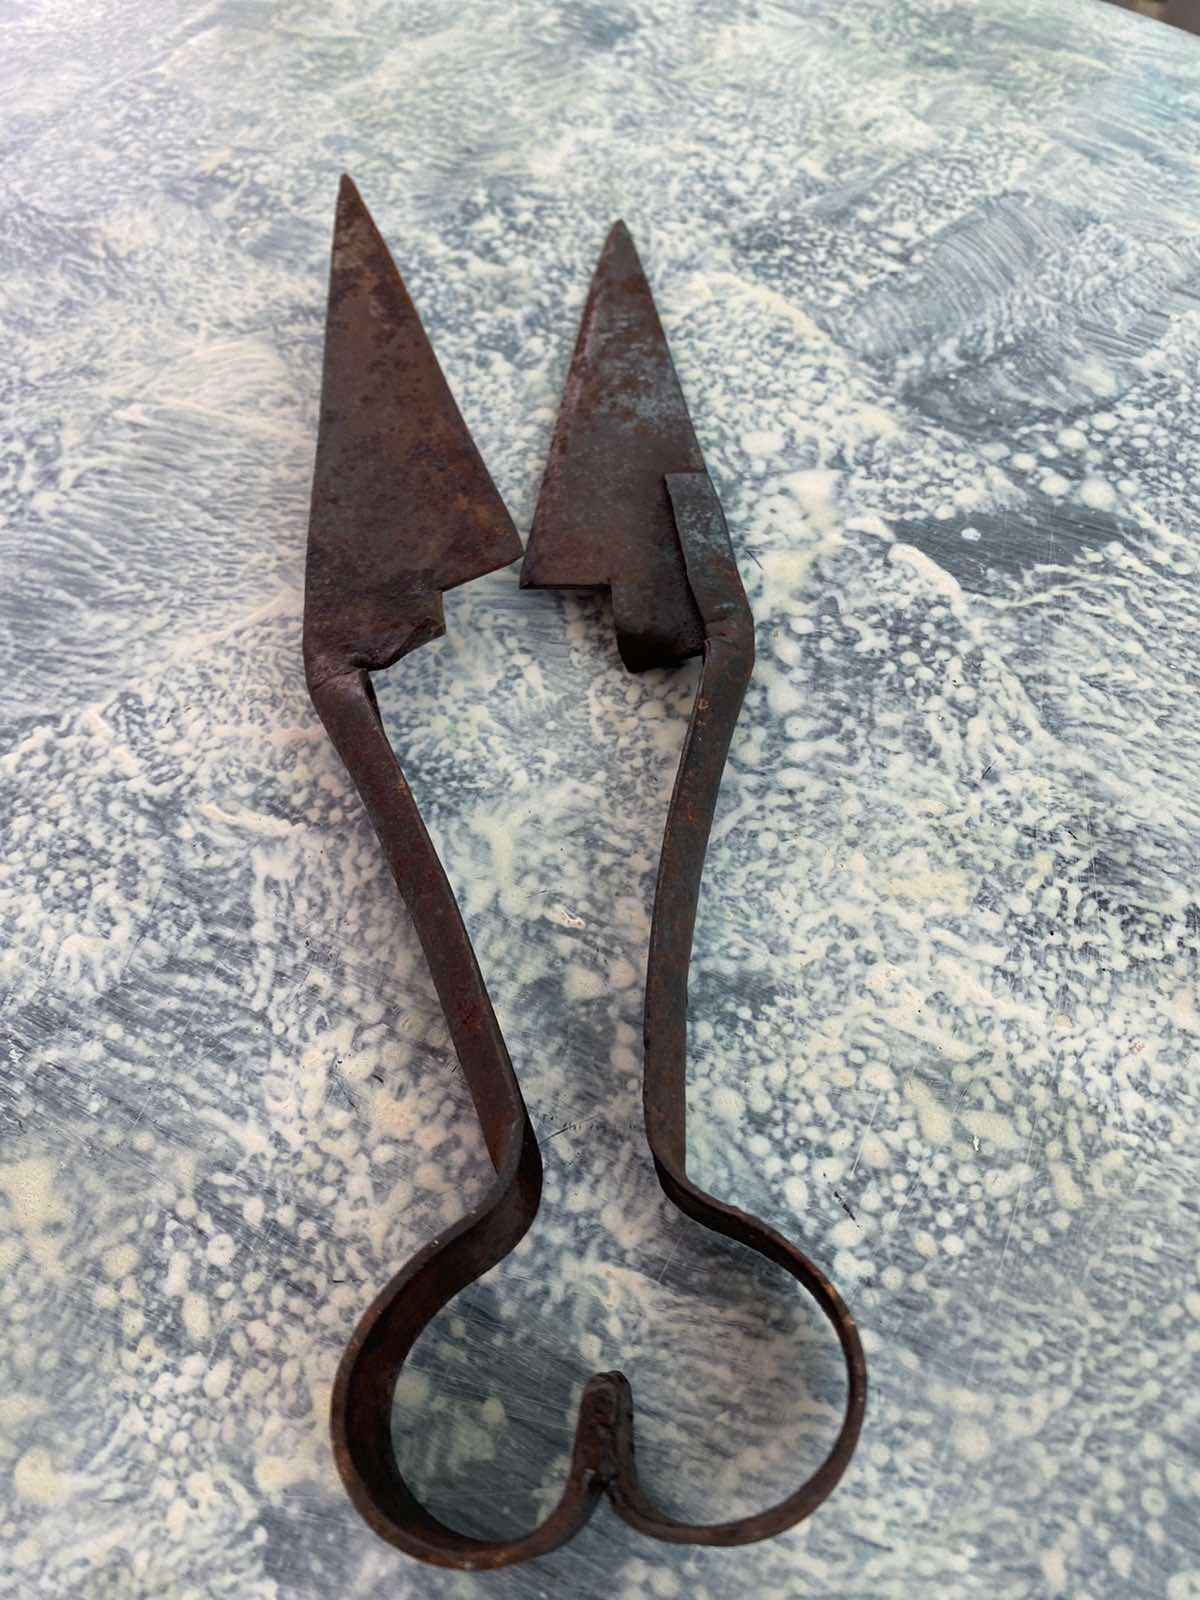 Vintage 1930s to 1950s Metal Sheep Shears Trimmers Rustic Farm Tool  Primitive Metal Display Country Home Decor Rusty Metal Farmhouse Decor 